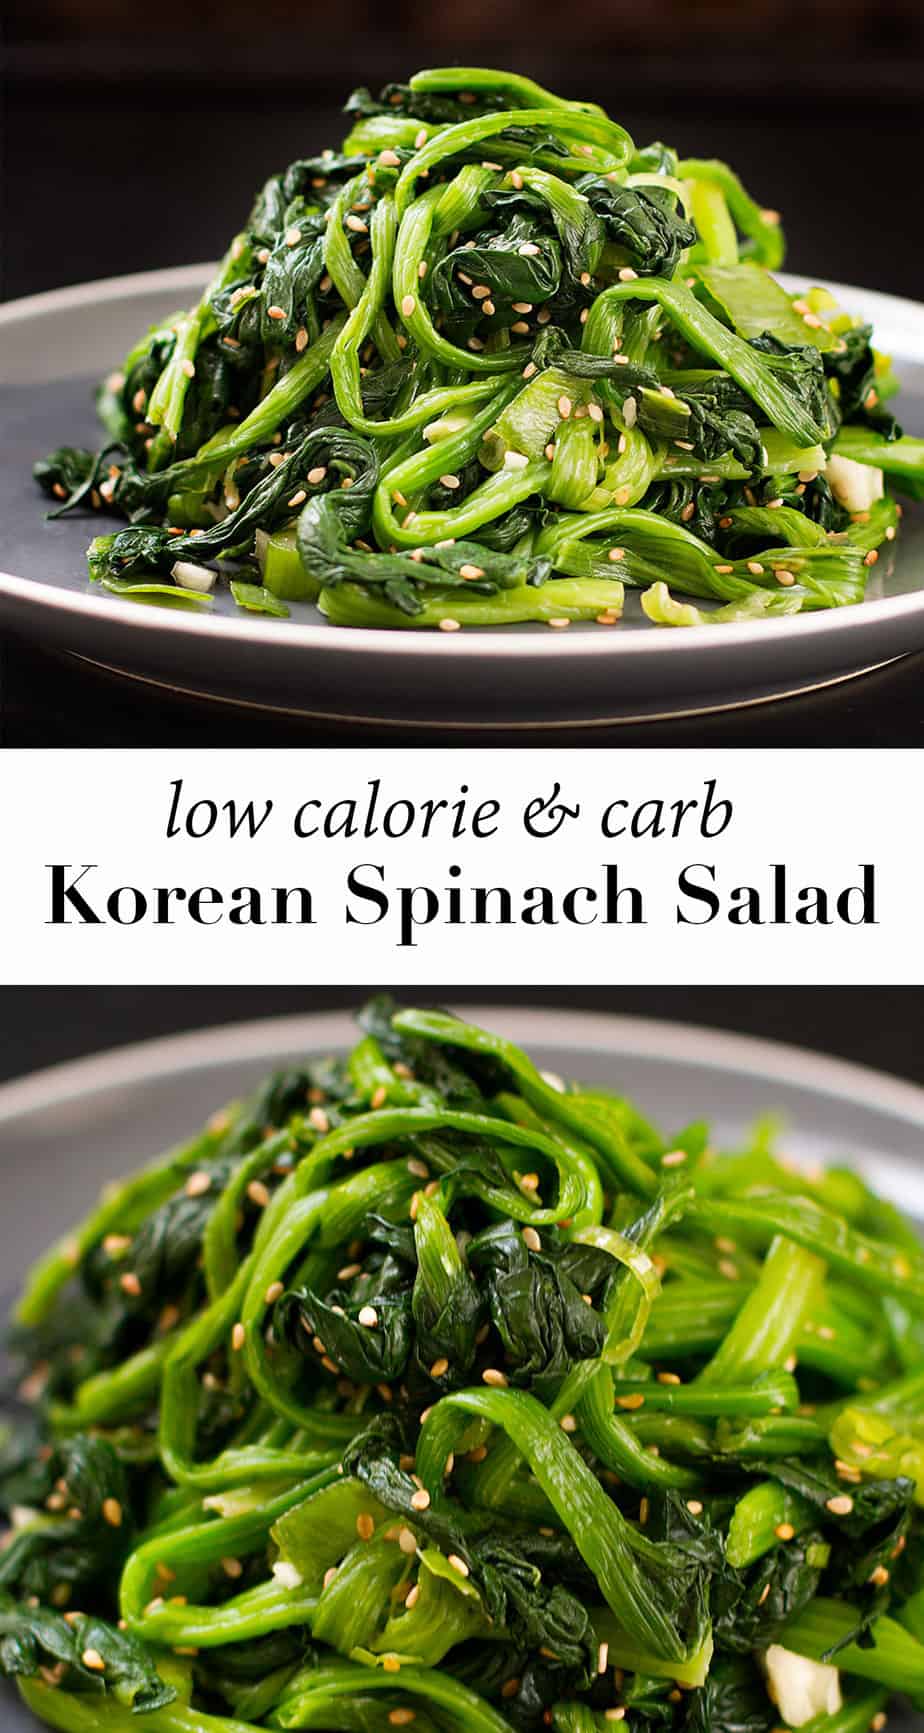 korean-spinach-salad-recipe. Tasty asian salad recipe with low calorie salad dressing from scratch. Carb friendly salad, Whole 30, perfect diabetic recipe meal plan, plant based